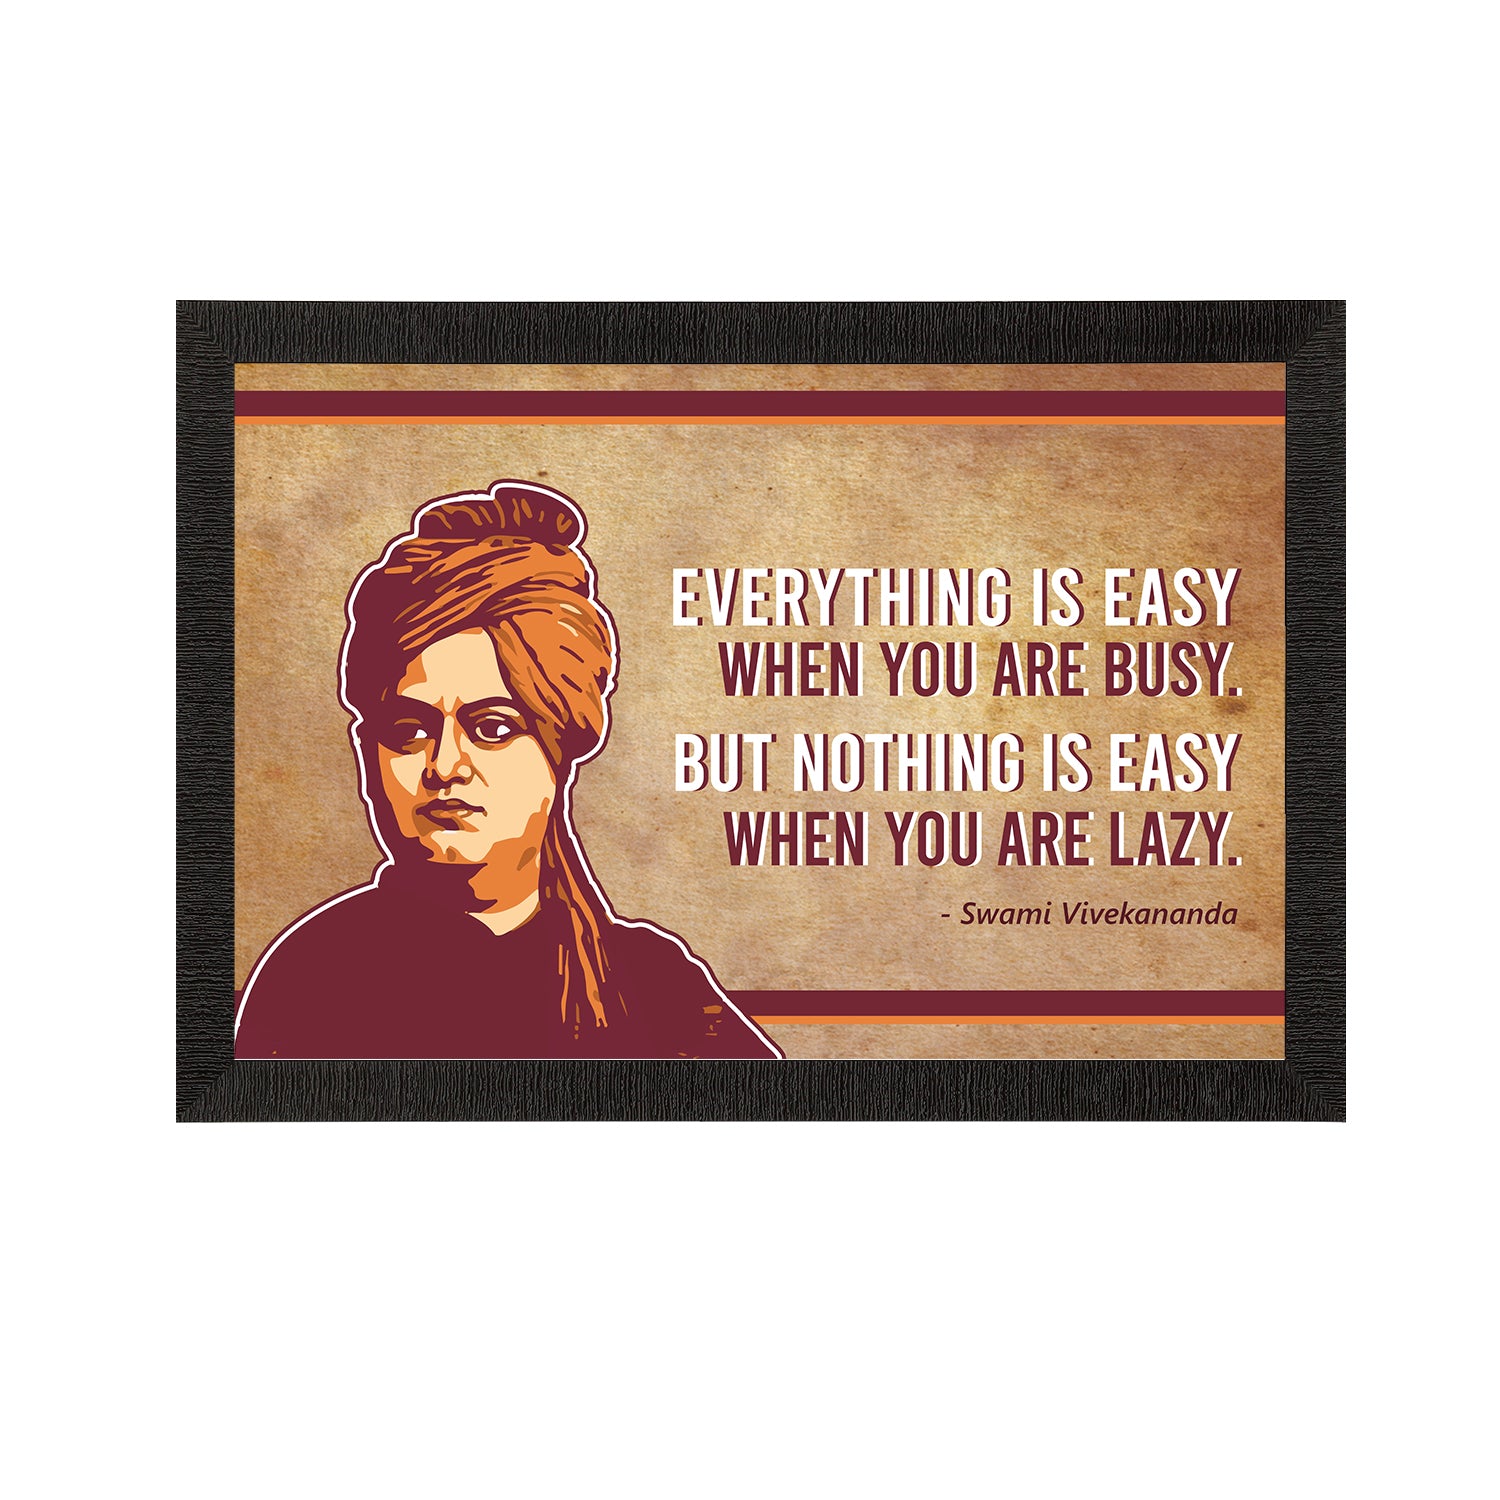 Everything Is Easy When You Are Busy, But Nothing Is Easy When You Are Lazy Swami Vivekananda Motivational Quote Painting